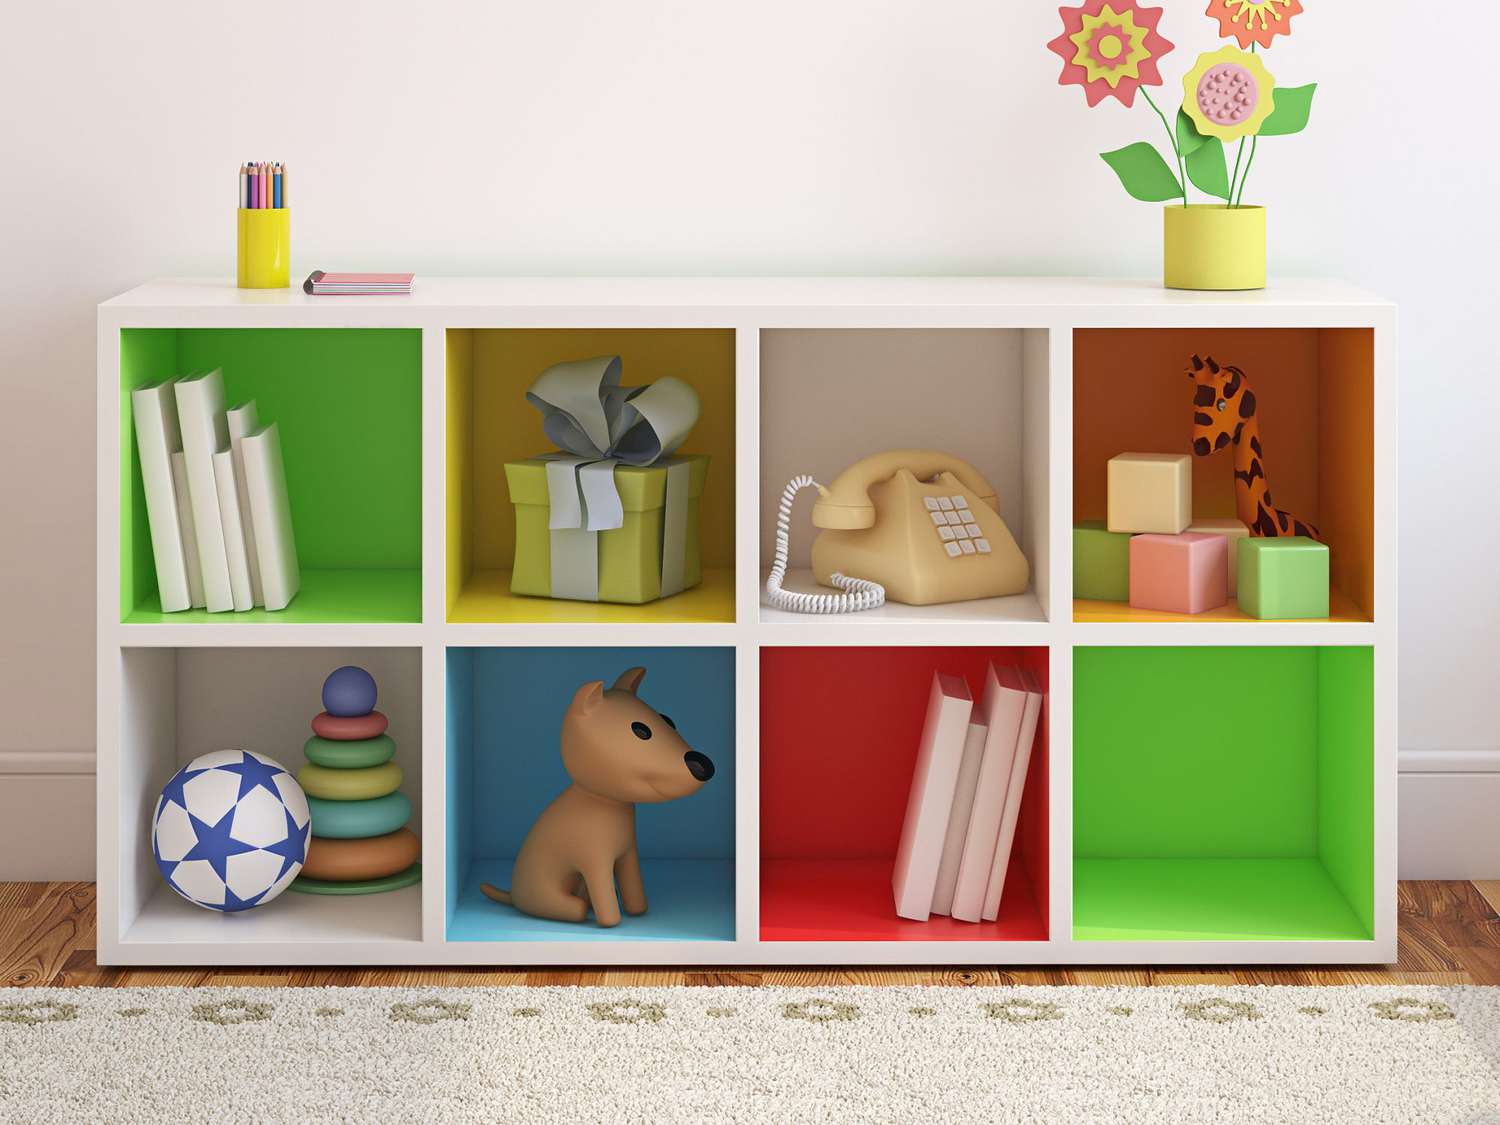 Interior of playroom with storage cubes for toys